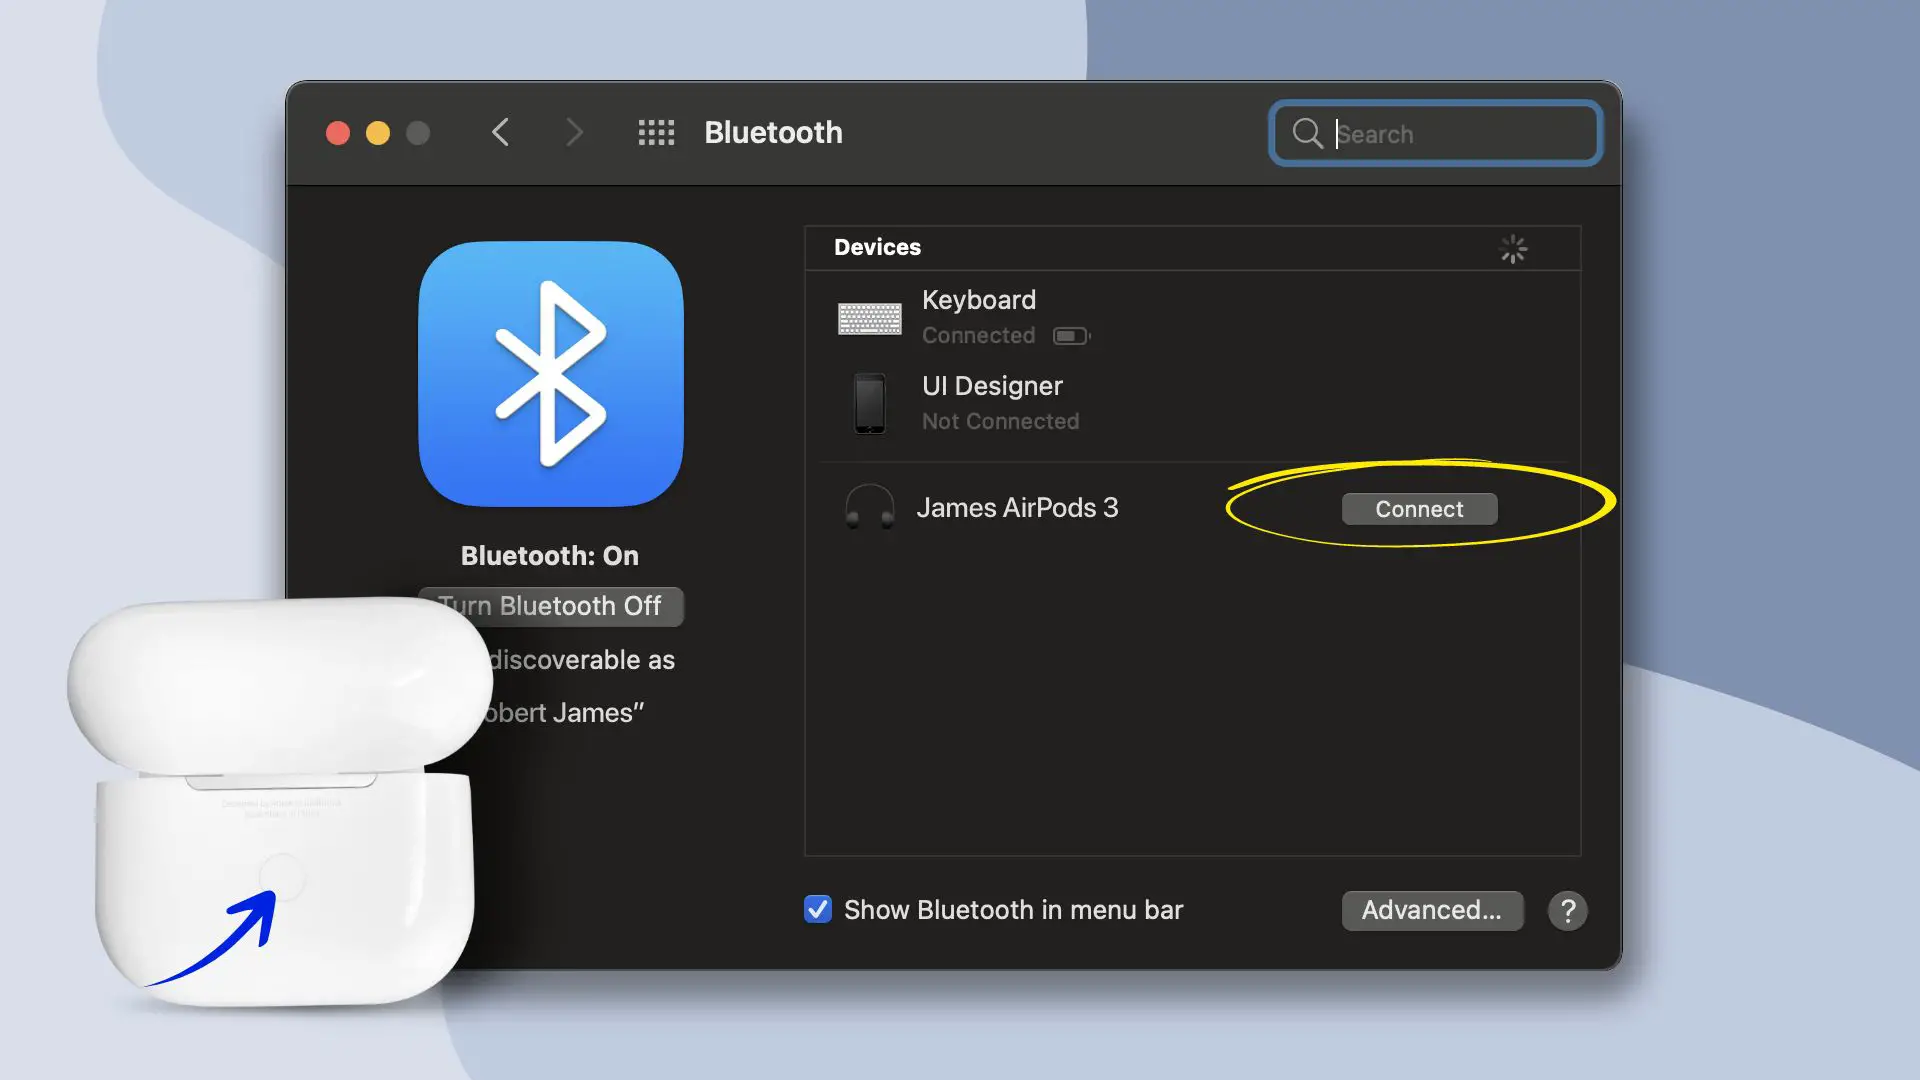 Steps on how to pair AirPods with Mac